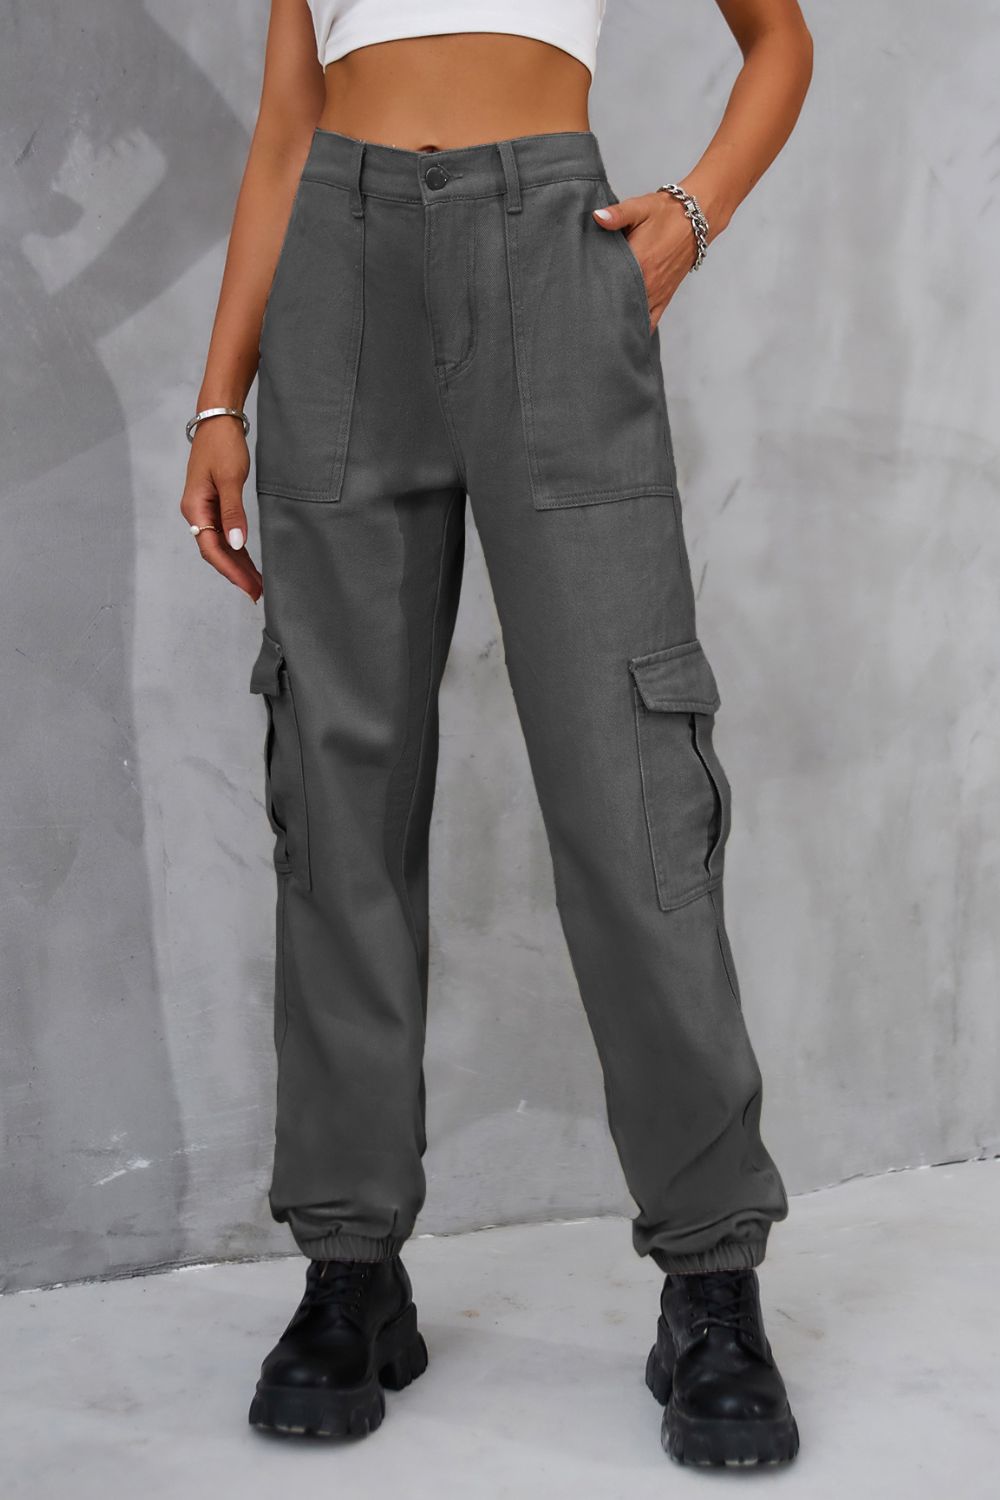 Light Slate Gray Buttoned High Waist Jeans with Pockets Sentient Beauty Fashions Apparel &amp; Accessories